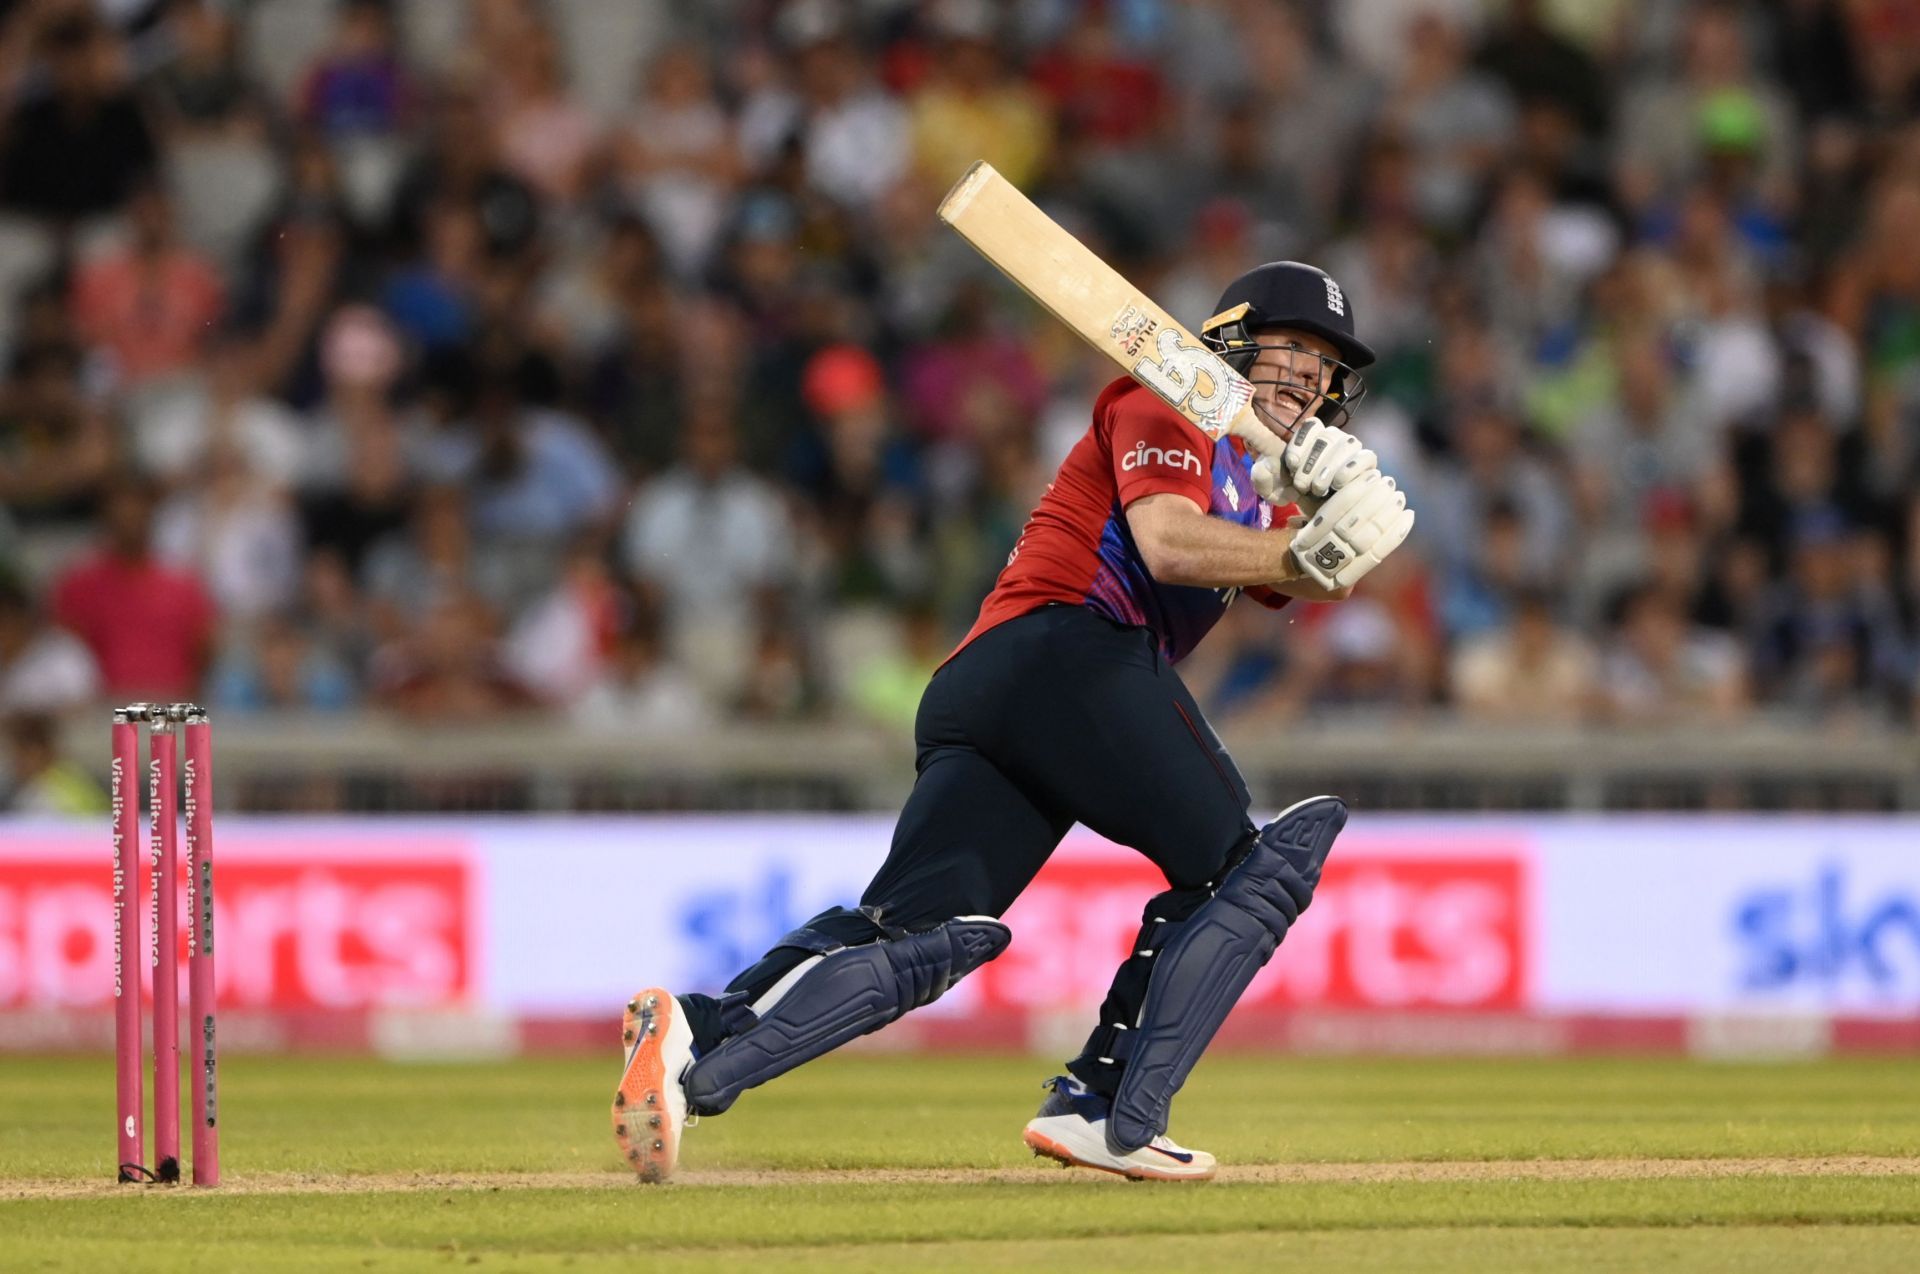 England captain Eoin Morgan is short of runs heading into the T20 World Cup. Pic: Getty Image